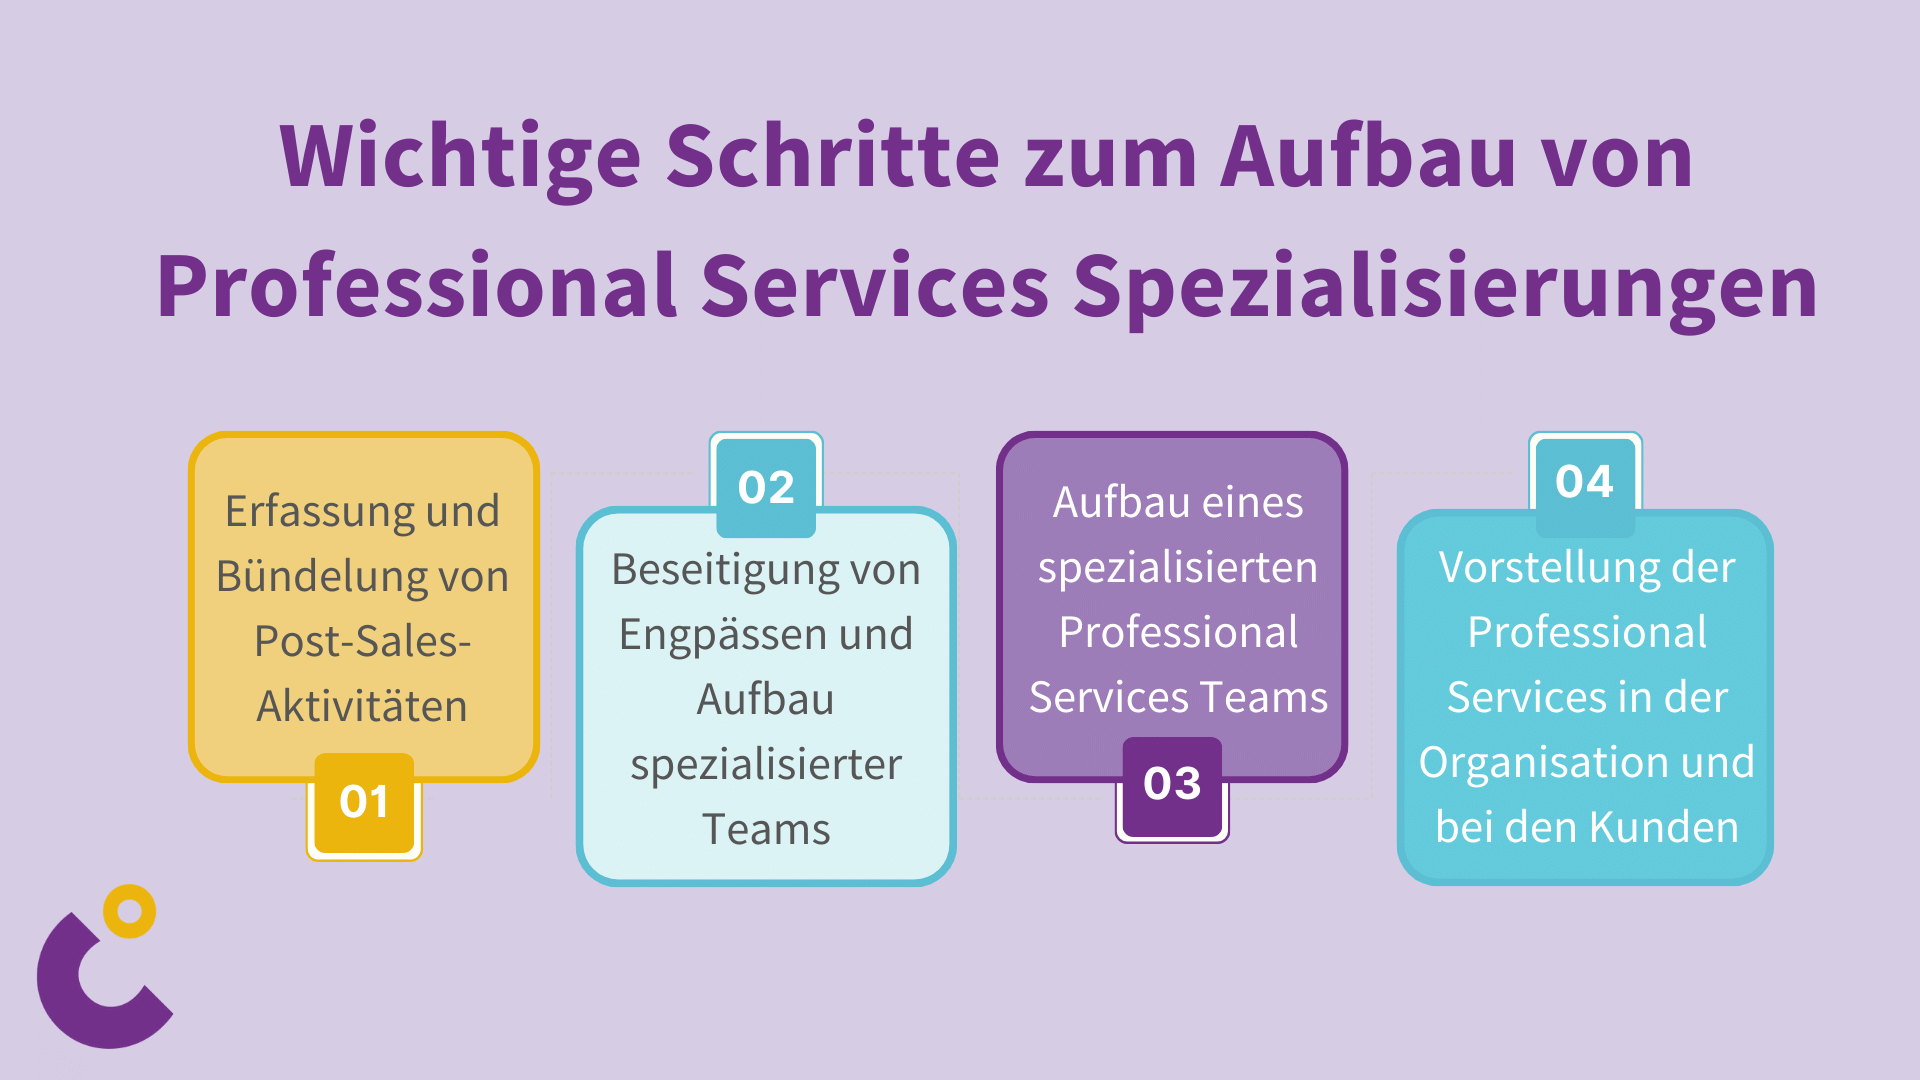 Key Steps to establish Professional Services Specializations